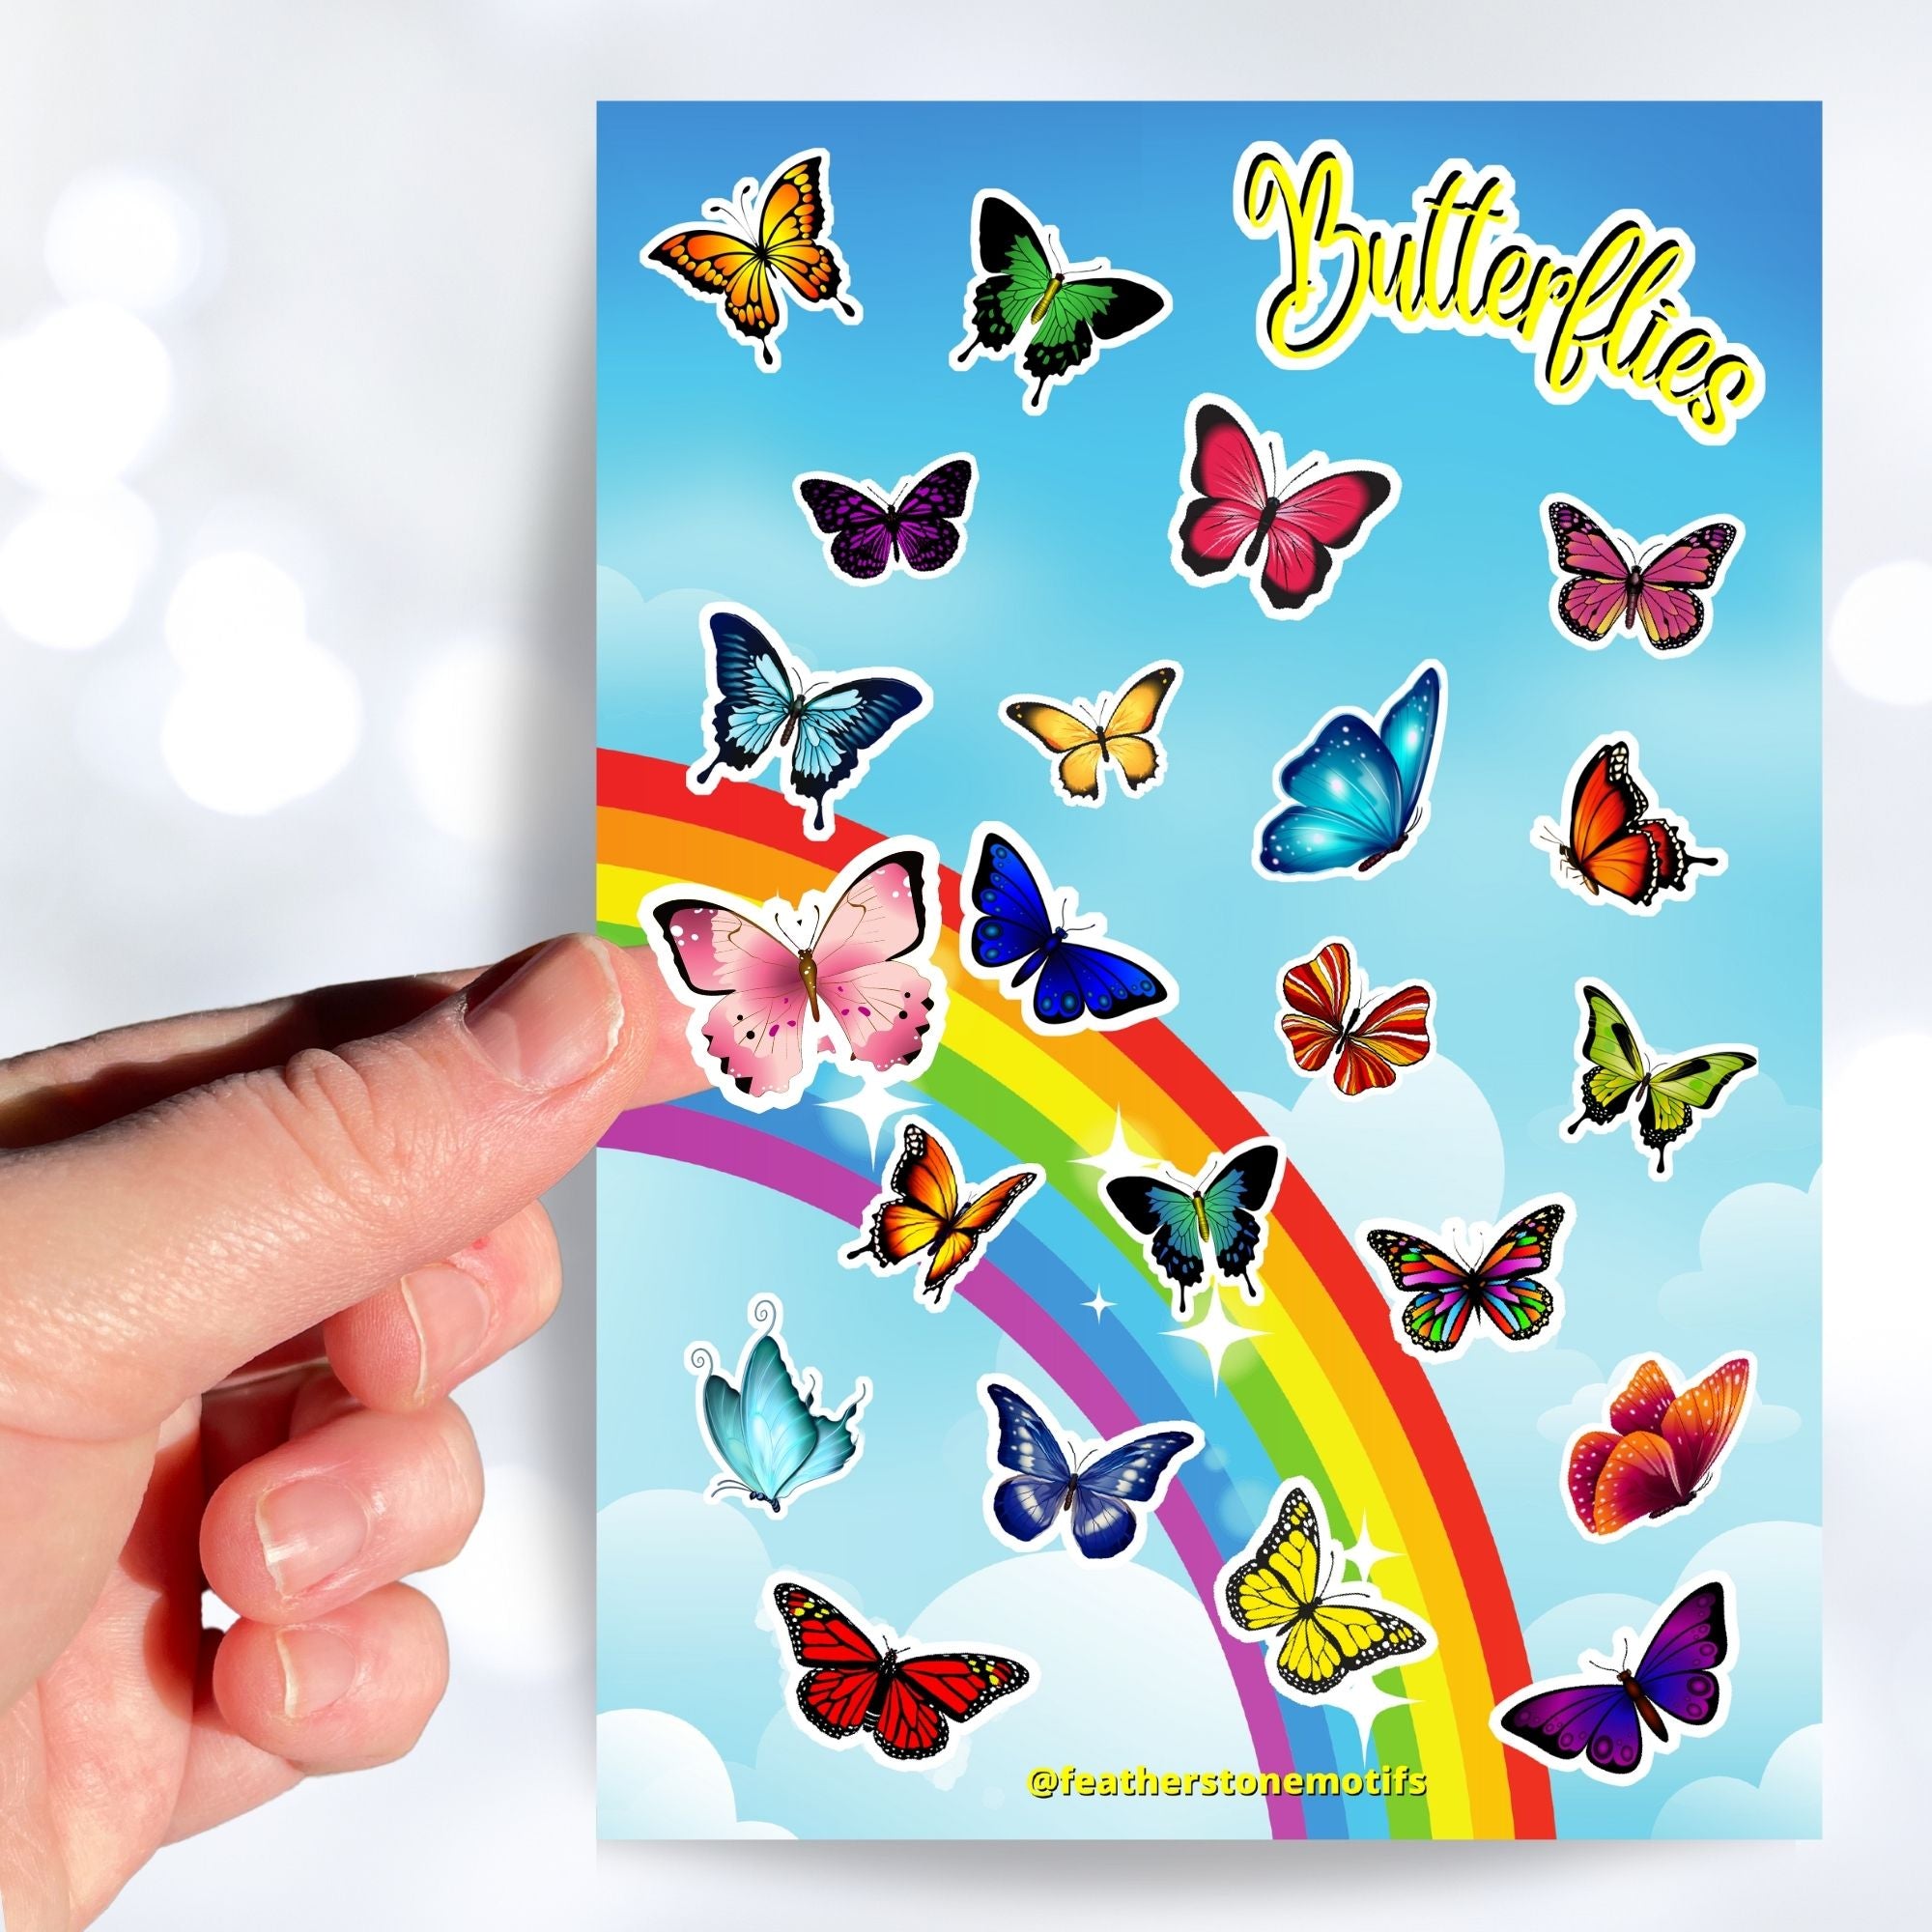 With over 20 butterfly stickers, this sticker sheet will be a sure hit with anyone who loves butterflies! This image shows a hand holding a pink butterfly above the sticker sheet.